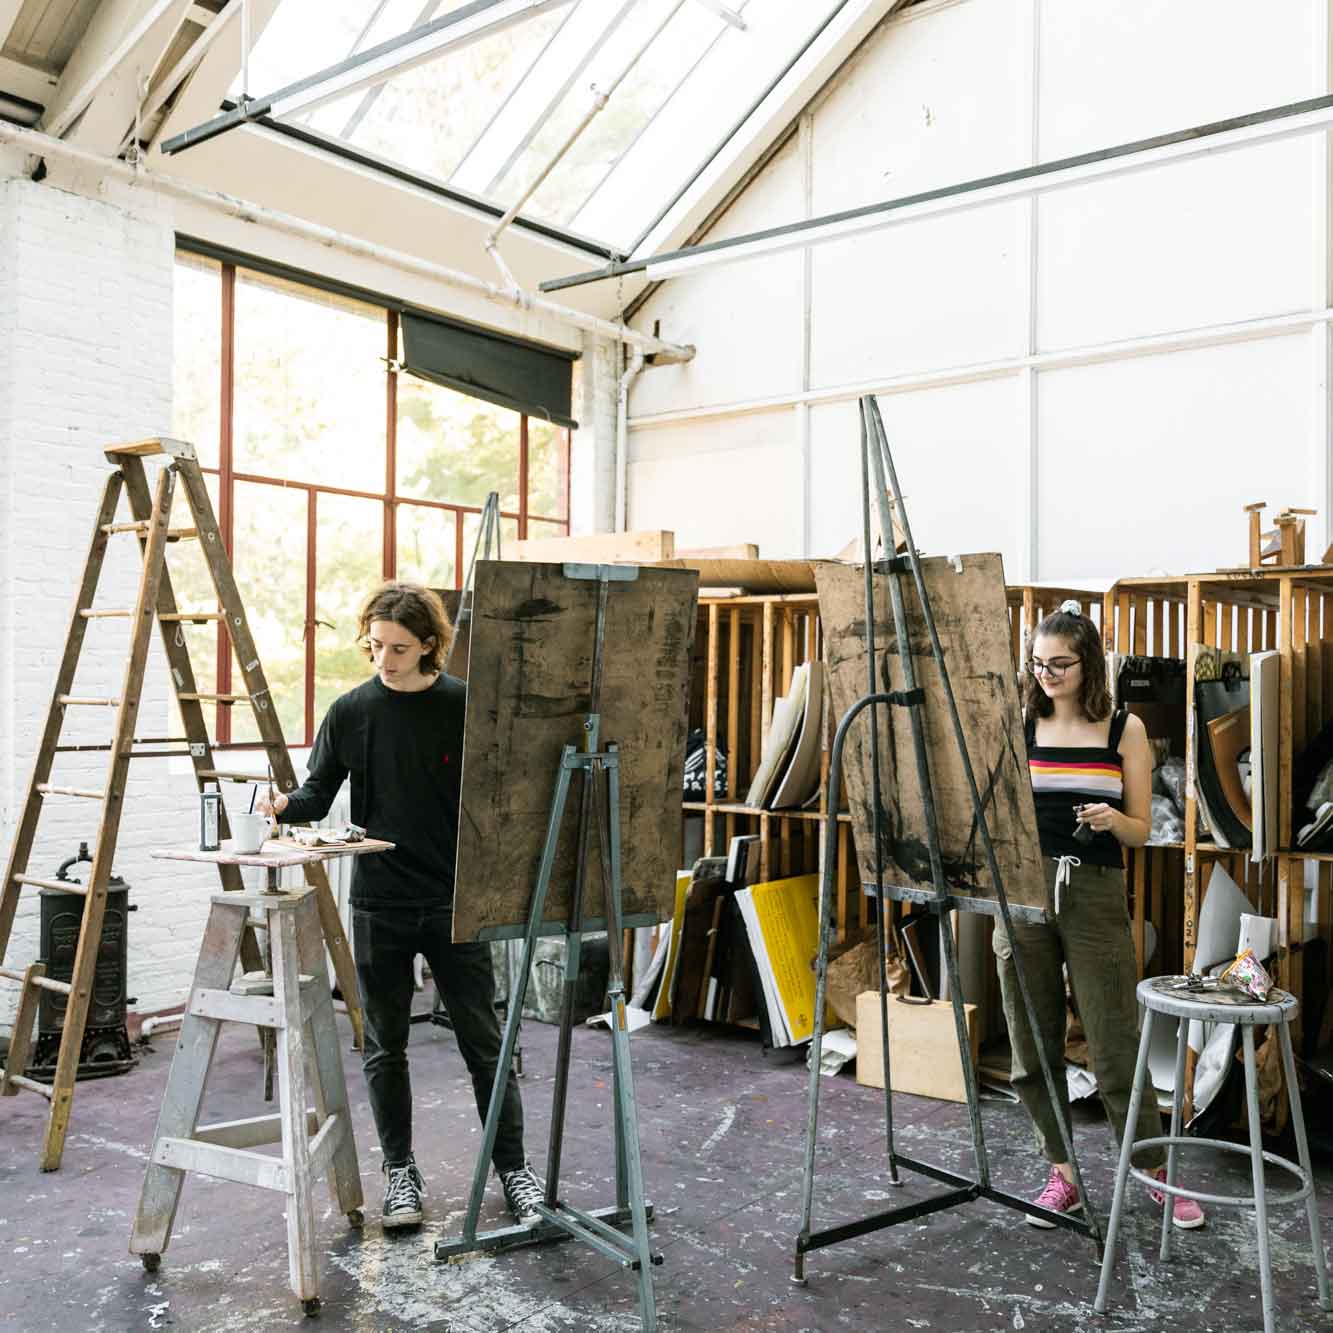 Students painting on easels in art studio